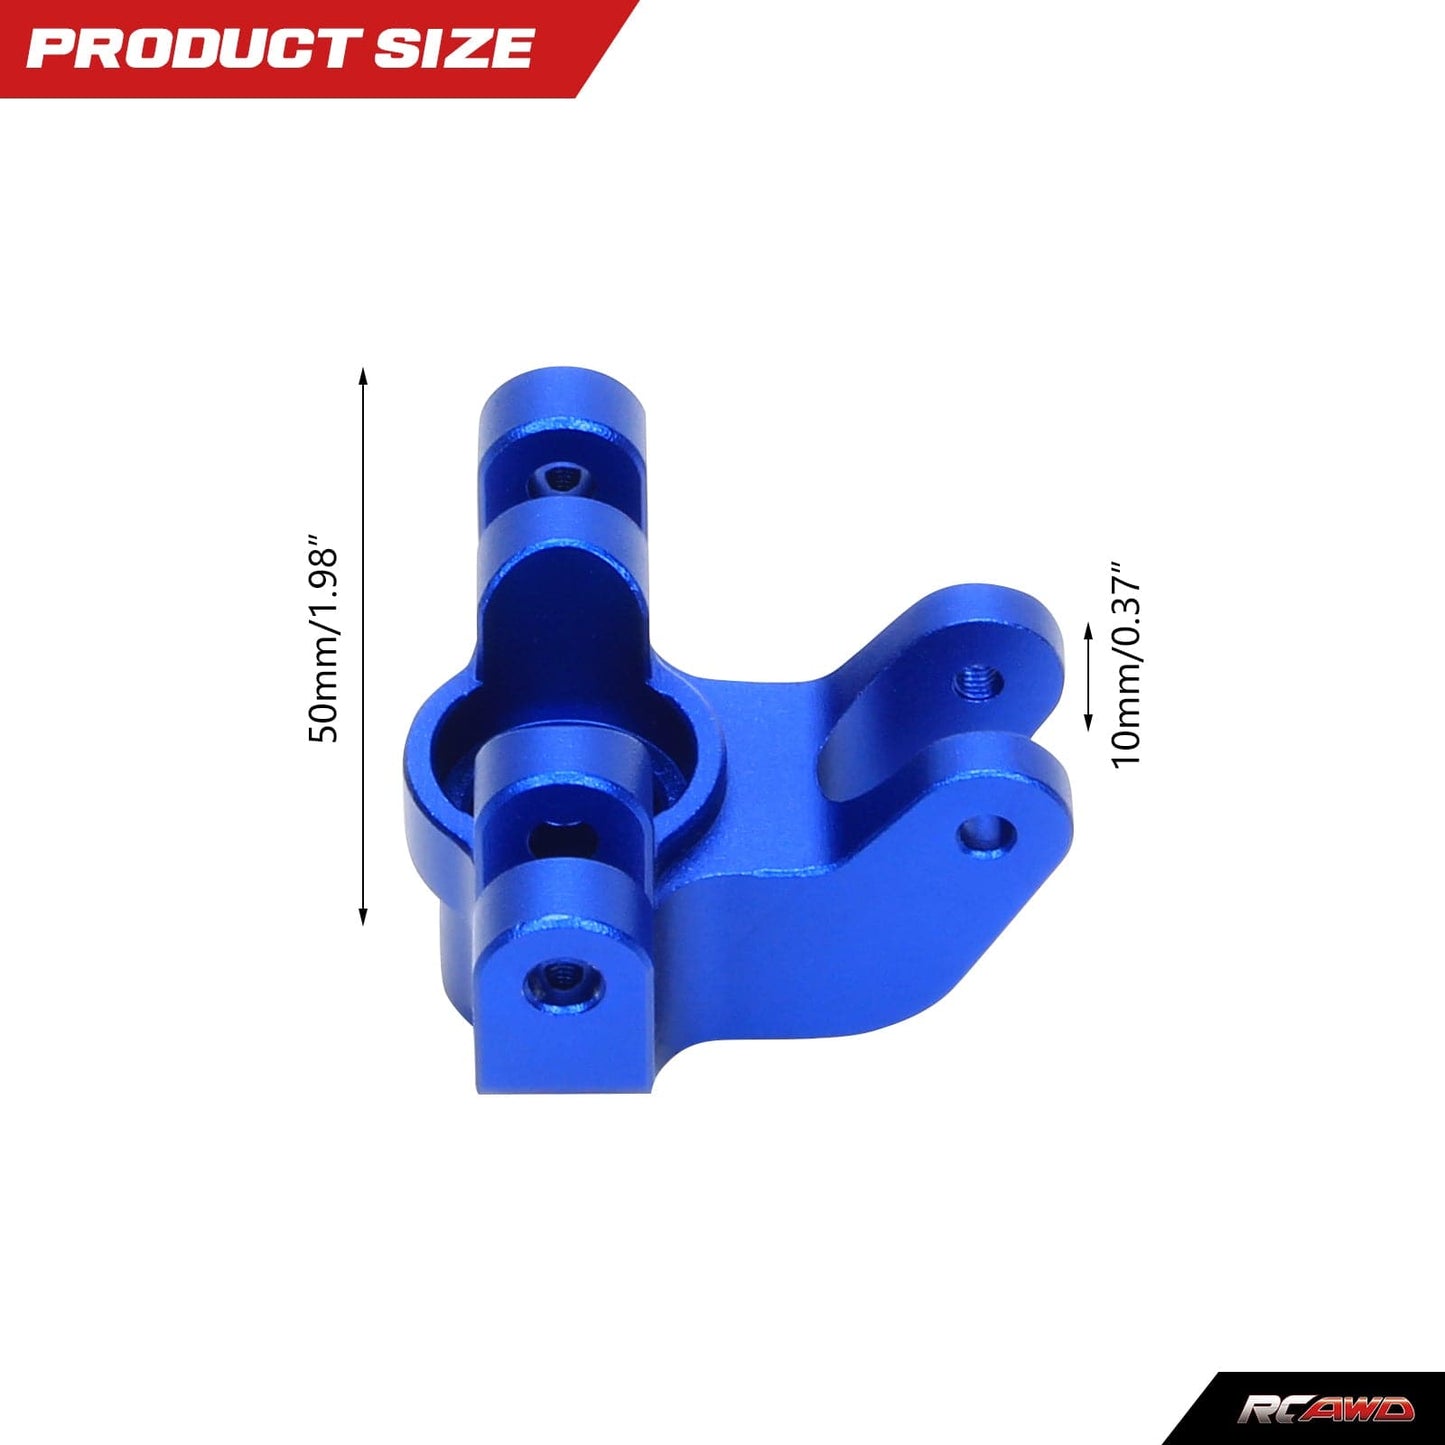 RCAWD Losi LMT Upgrade parts steering hub carrier knuckle arm blocks Spindle Set Front (L/R) LOS244004 - RCAWD